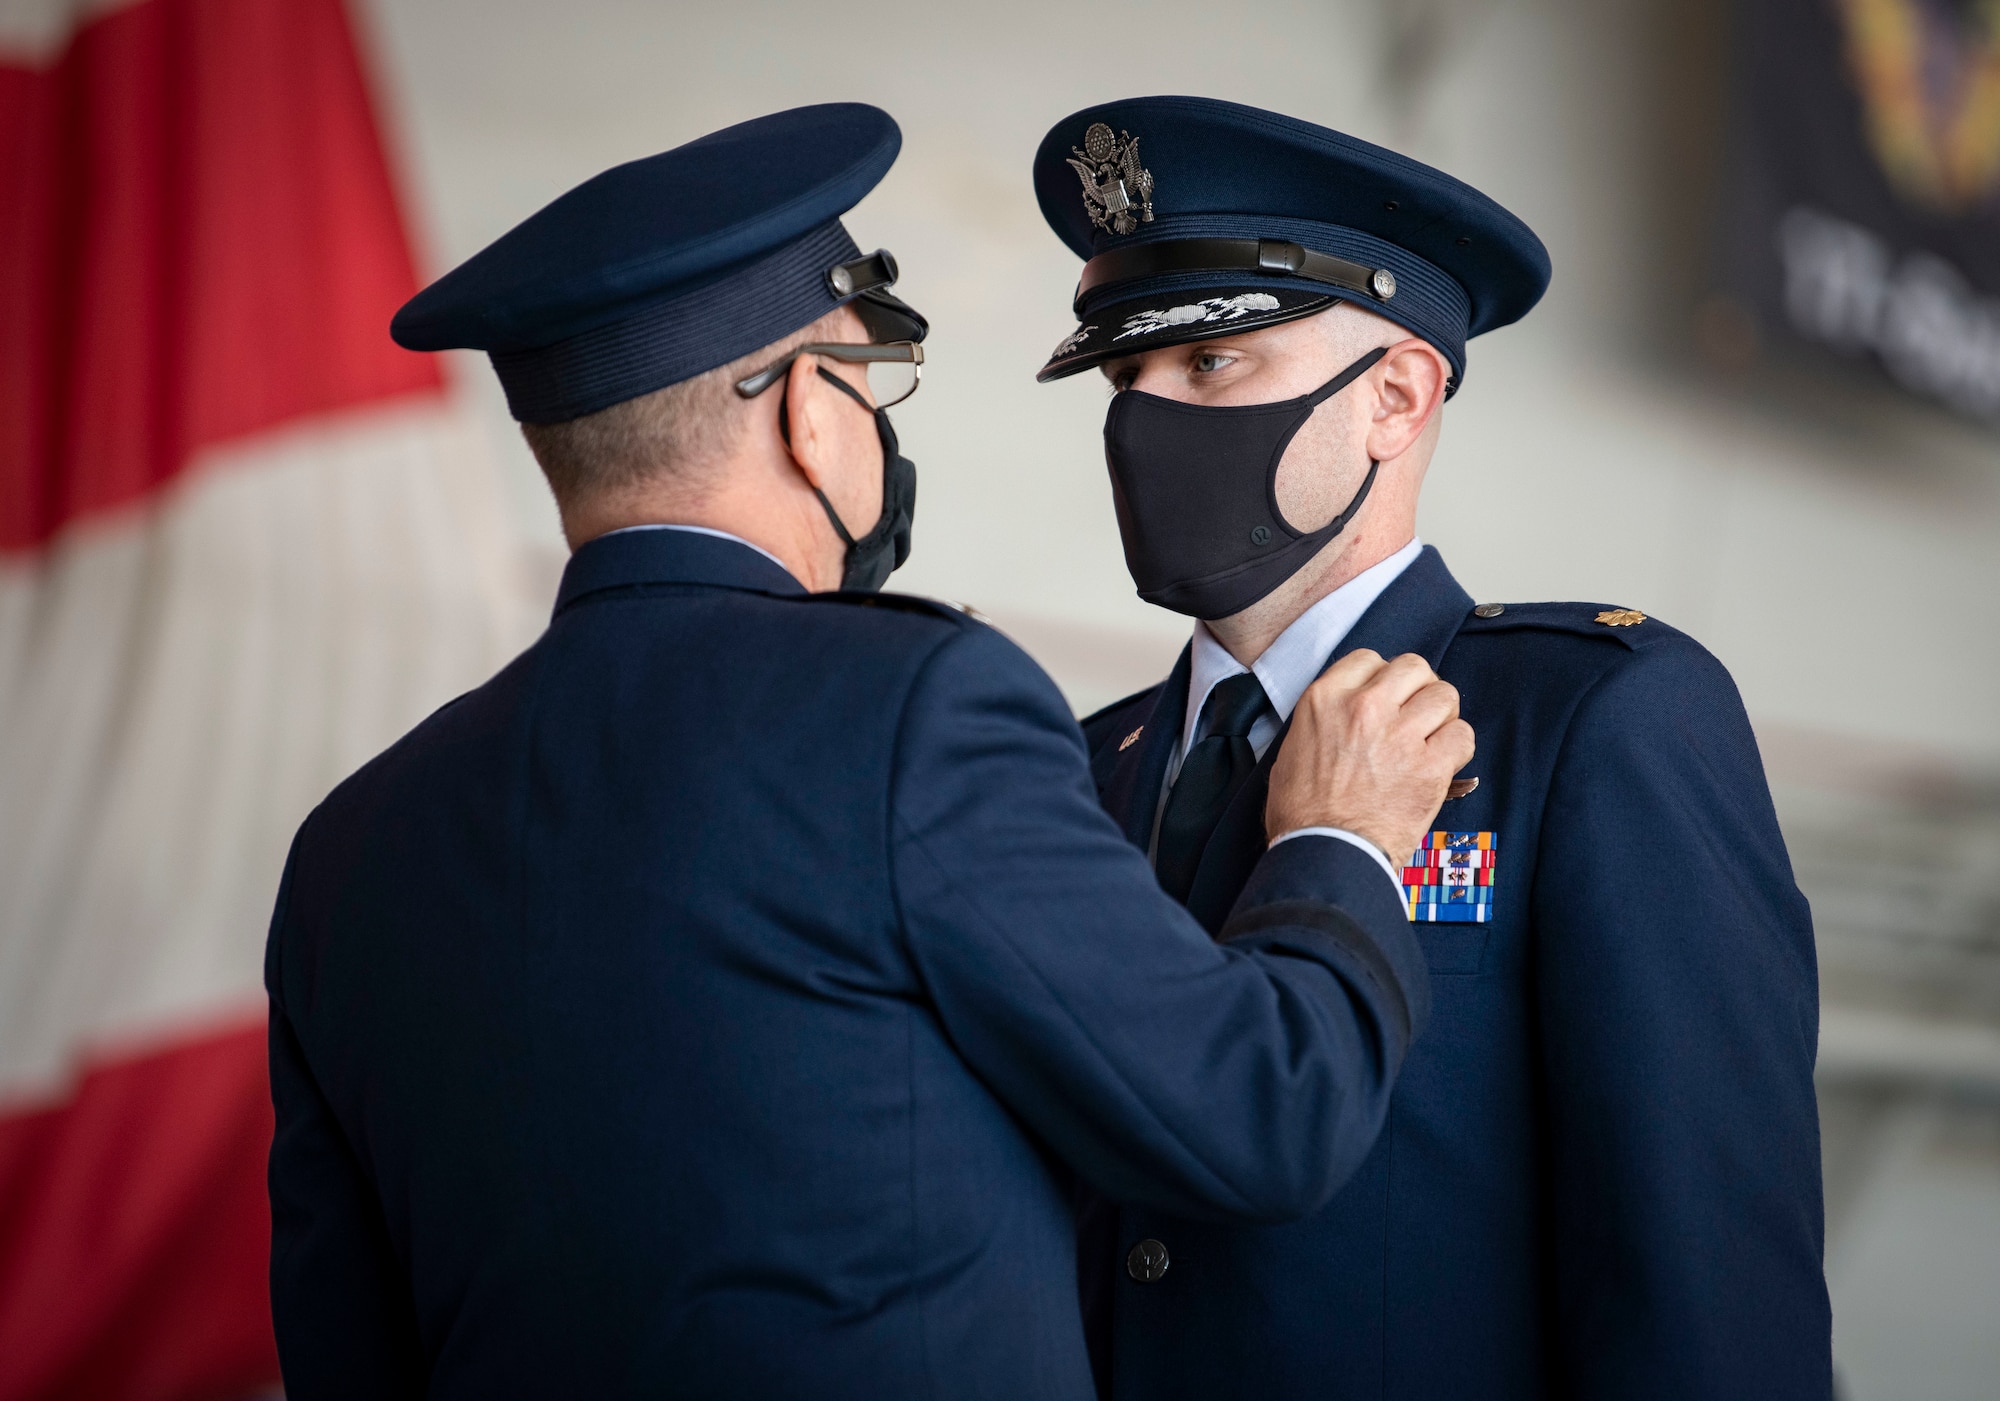 U.S. Air Force Maj. Christopher B. Summerlin, 15th Expeditionary Special Operations Squadron MC-130H Combat Talon II aircraft commander, receives a Distinguished Flying Cross during a DFC presentation ceremony at Hurlburt Field, Florida, Nov. 8, 2021.